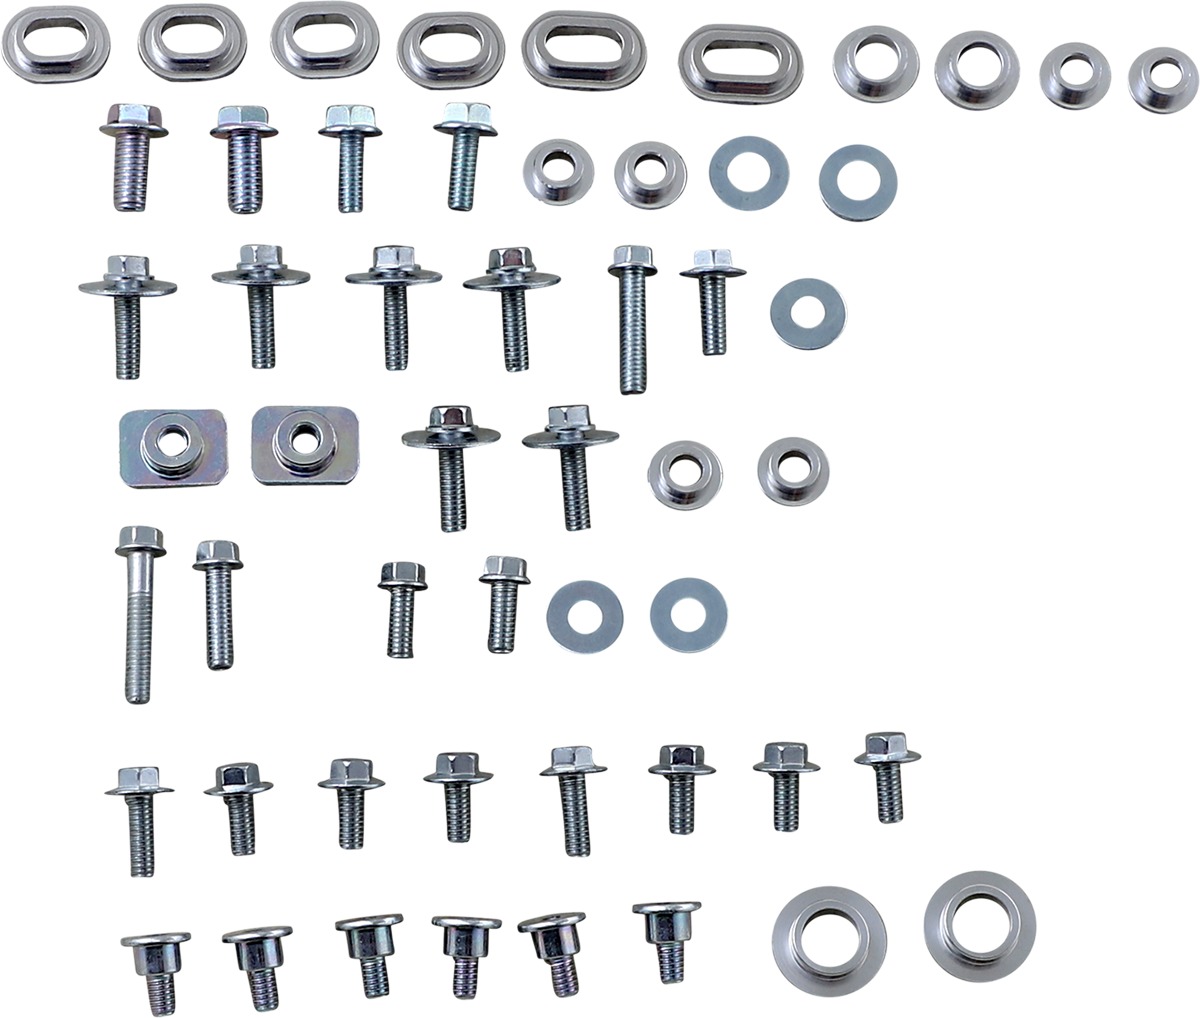 Full Plastic Fastener Kit - For 02-21 YZ125/250, 03-09 YZ250/450F, 03-11 WR250/450 - Click Image to Close